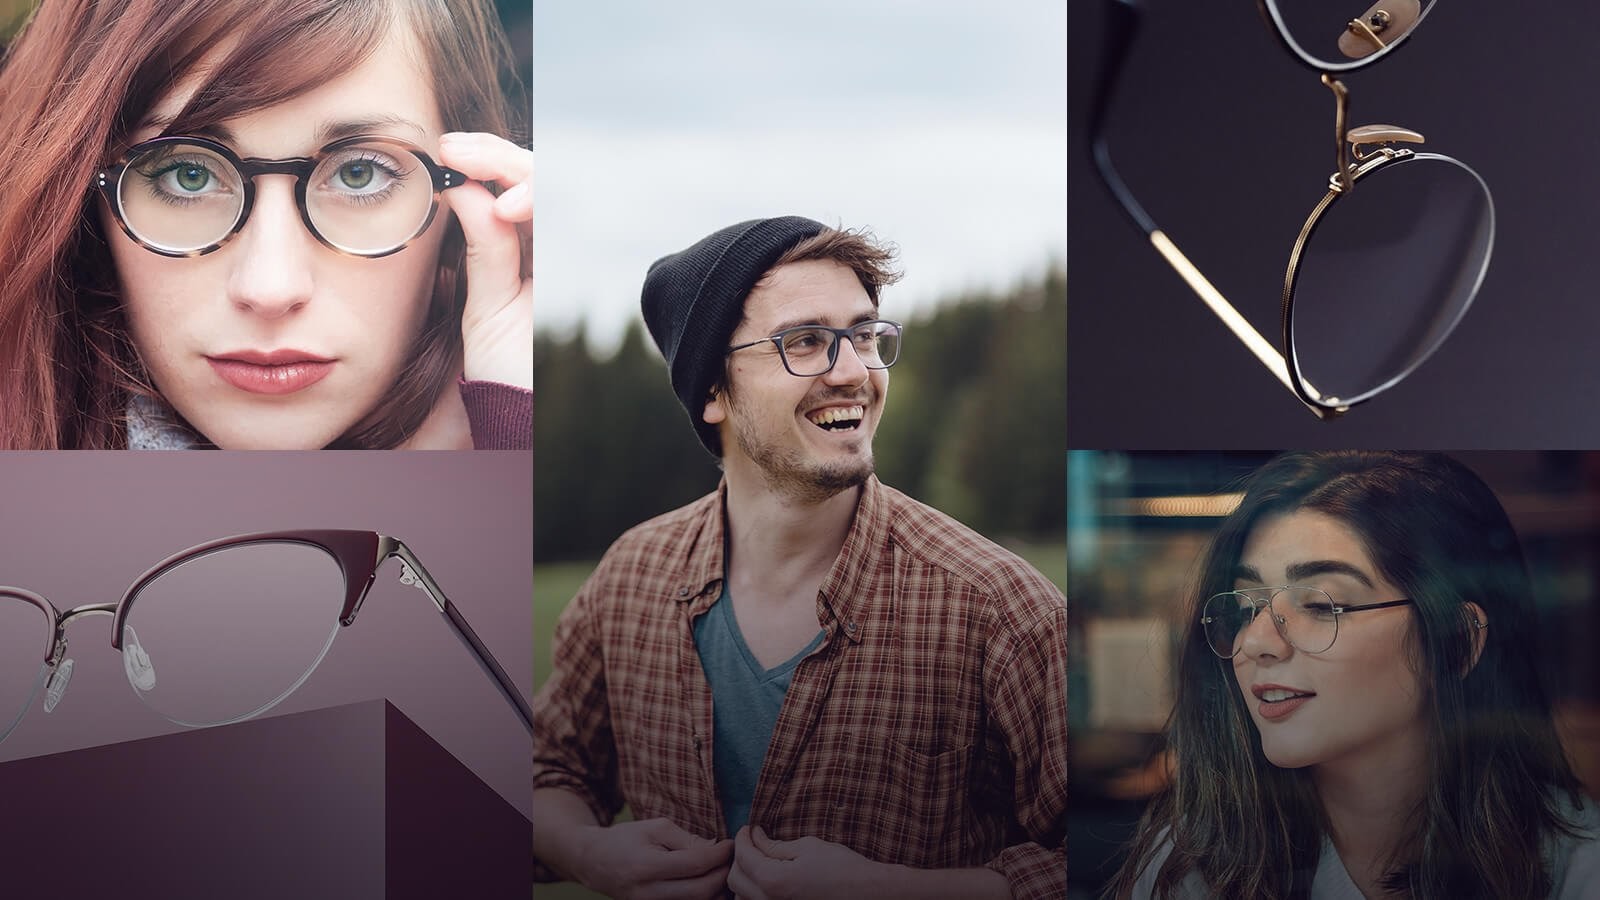 Want to know eyewear trends for 2022?